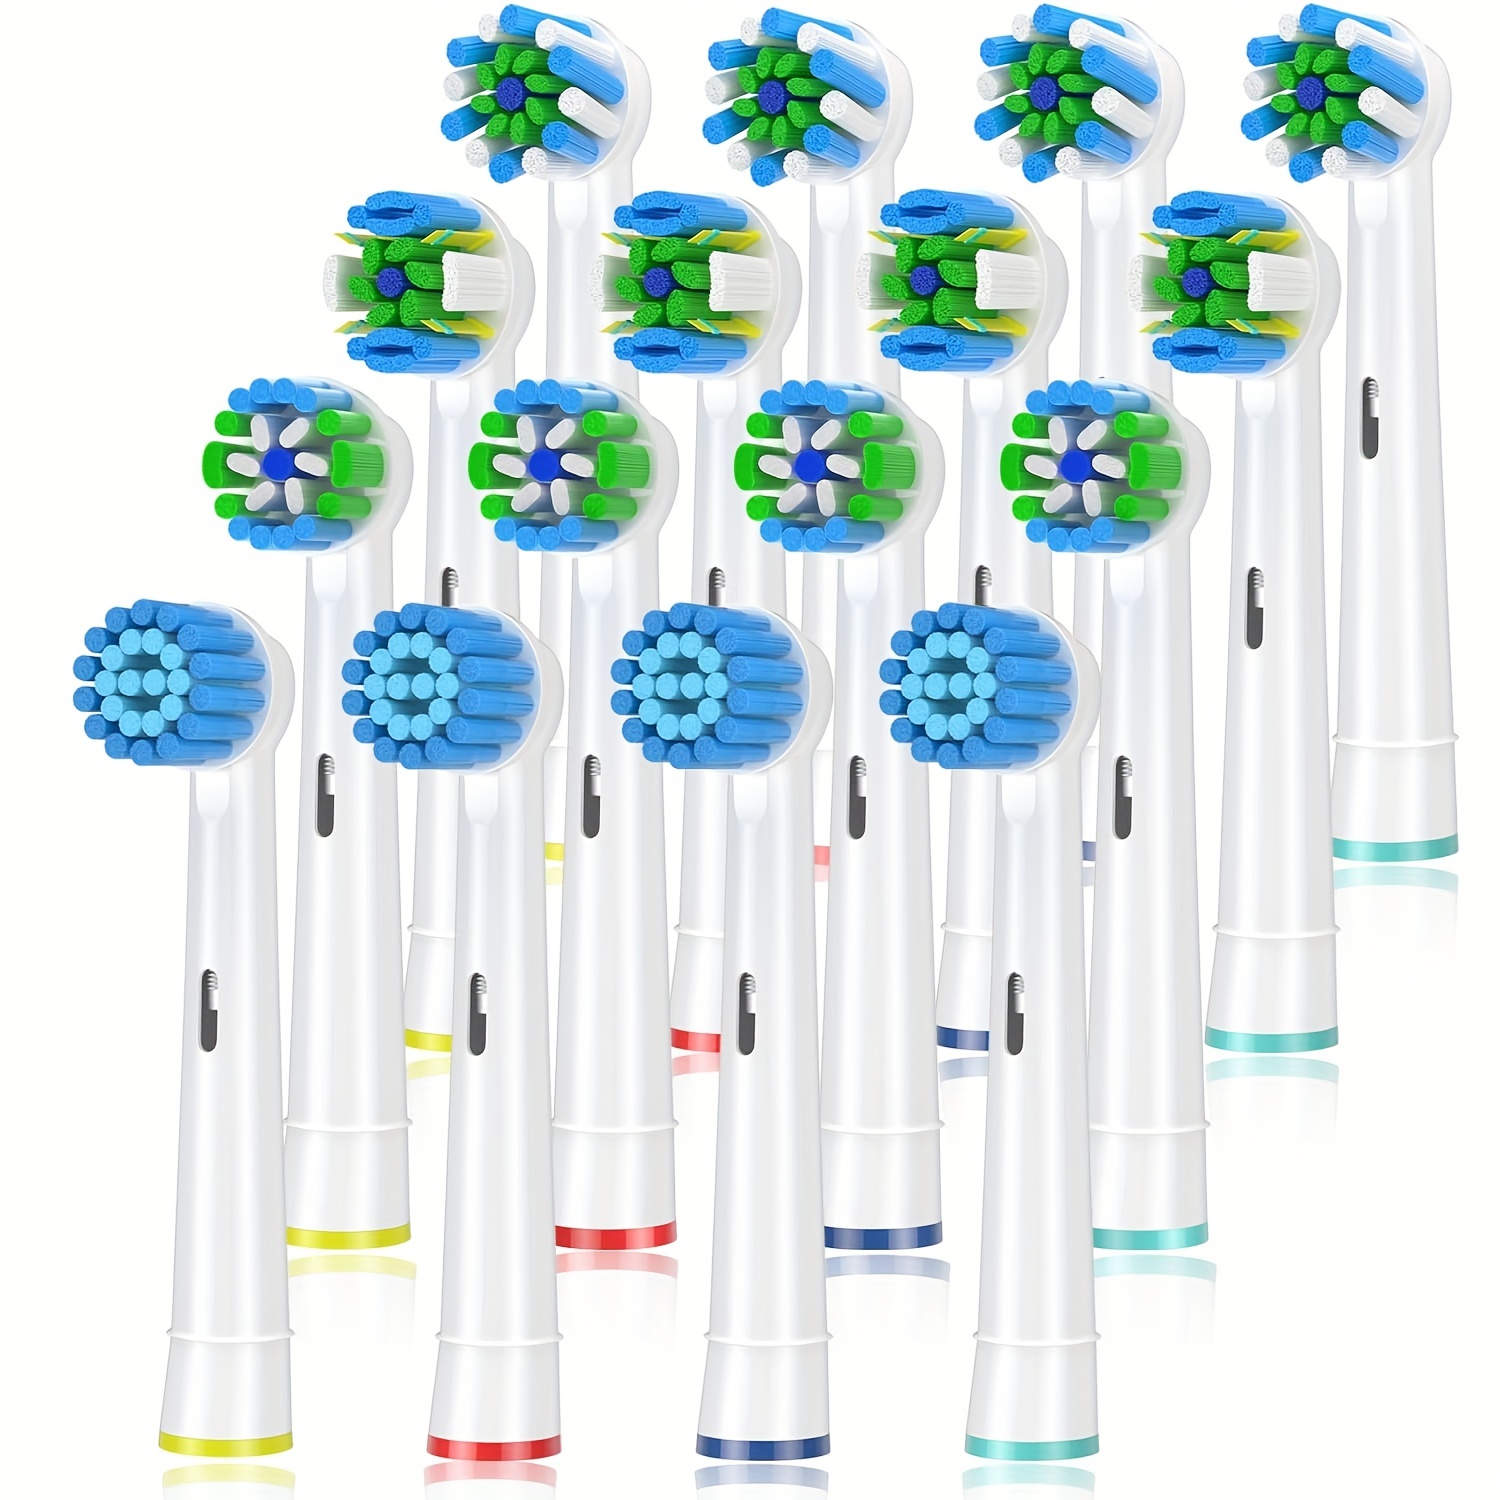 

16pcs Replacement Toothbrush Heads Compatible With Braun For Oral B 7000/pro 1000/9600/ 5000/3000/8000/genius And Smart Electric Toothbrush, (white)